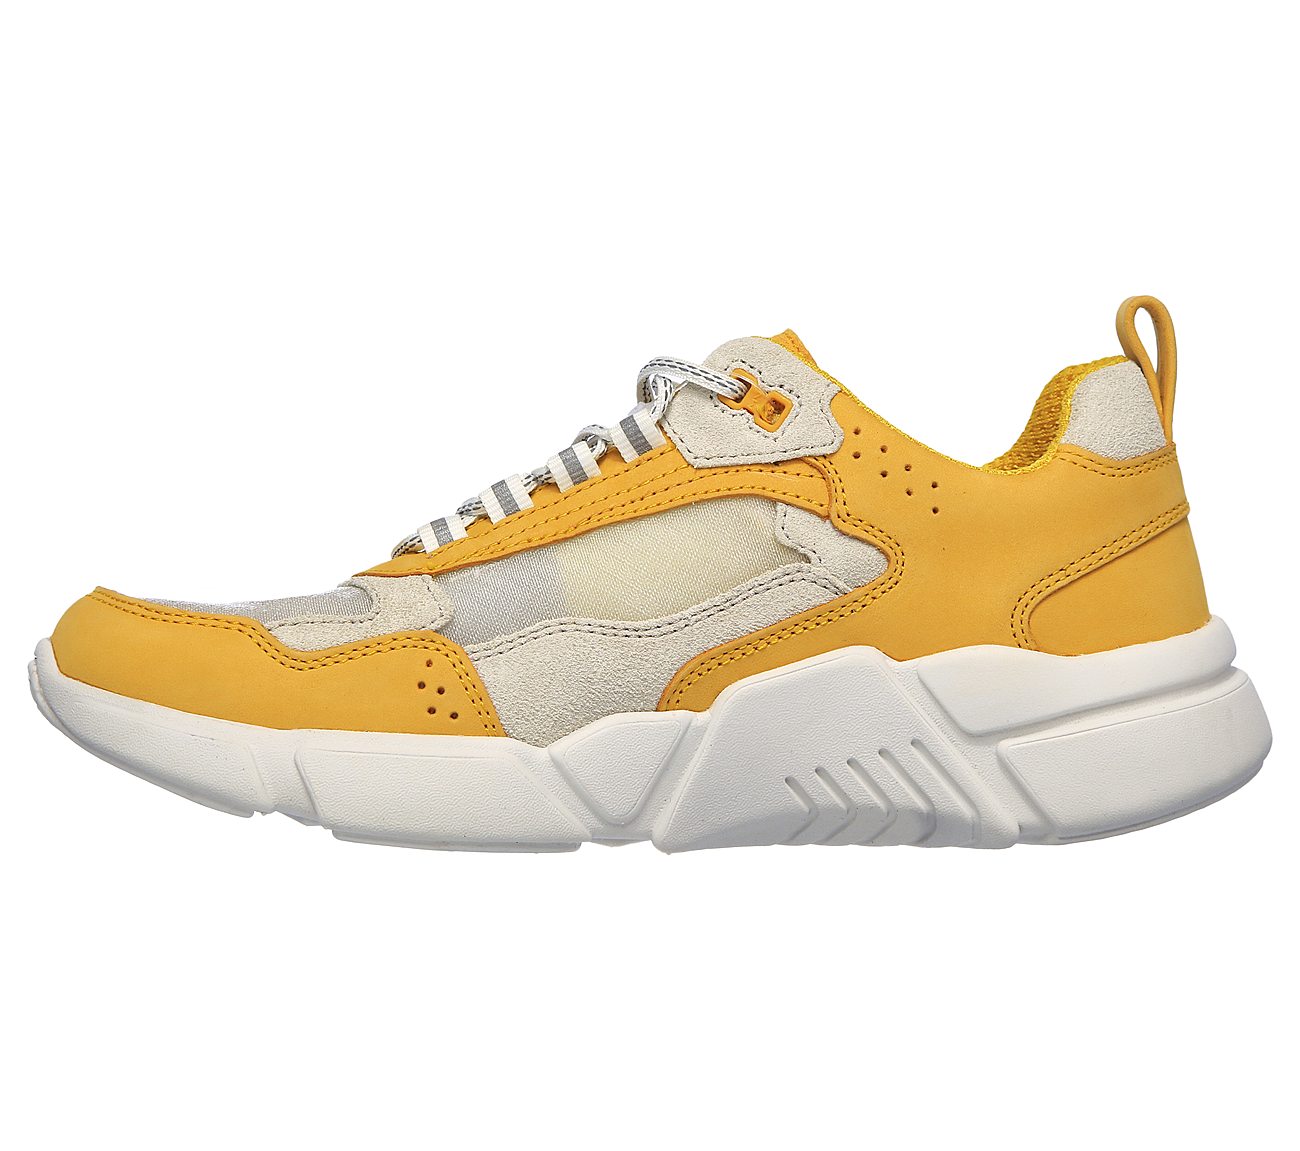 BLOCK - WEST, YELLOW/WHITE Footwear Left View